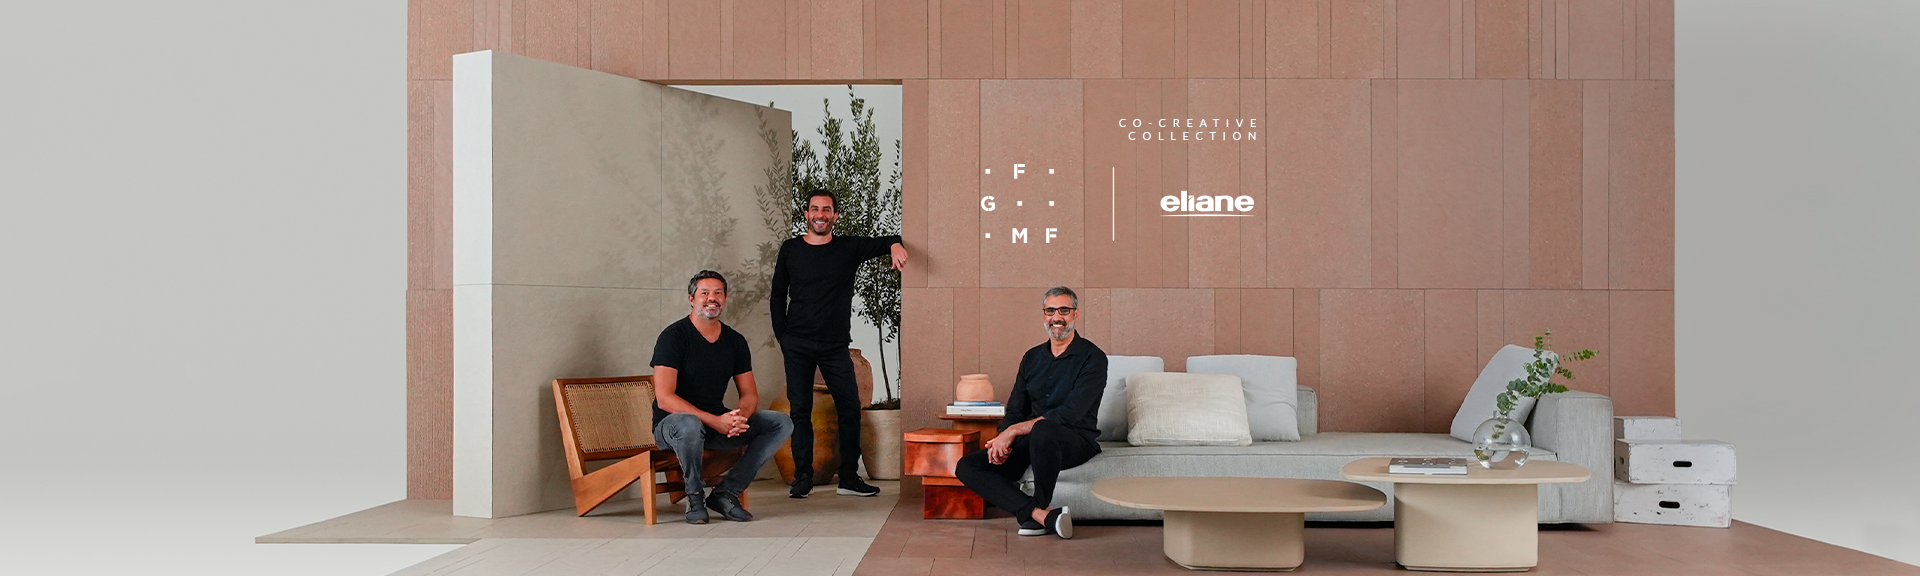 Relief :: Cocreative Collection by Eliane and FGMF